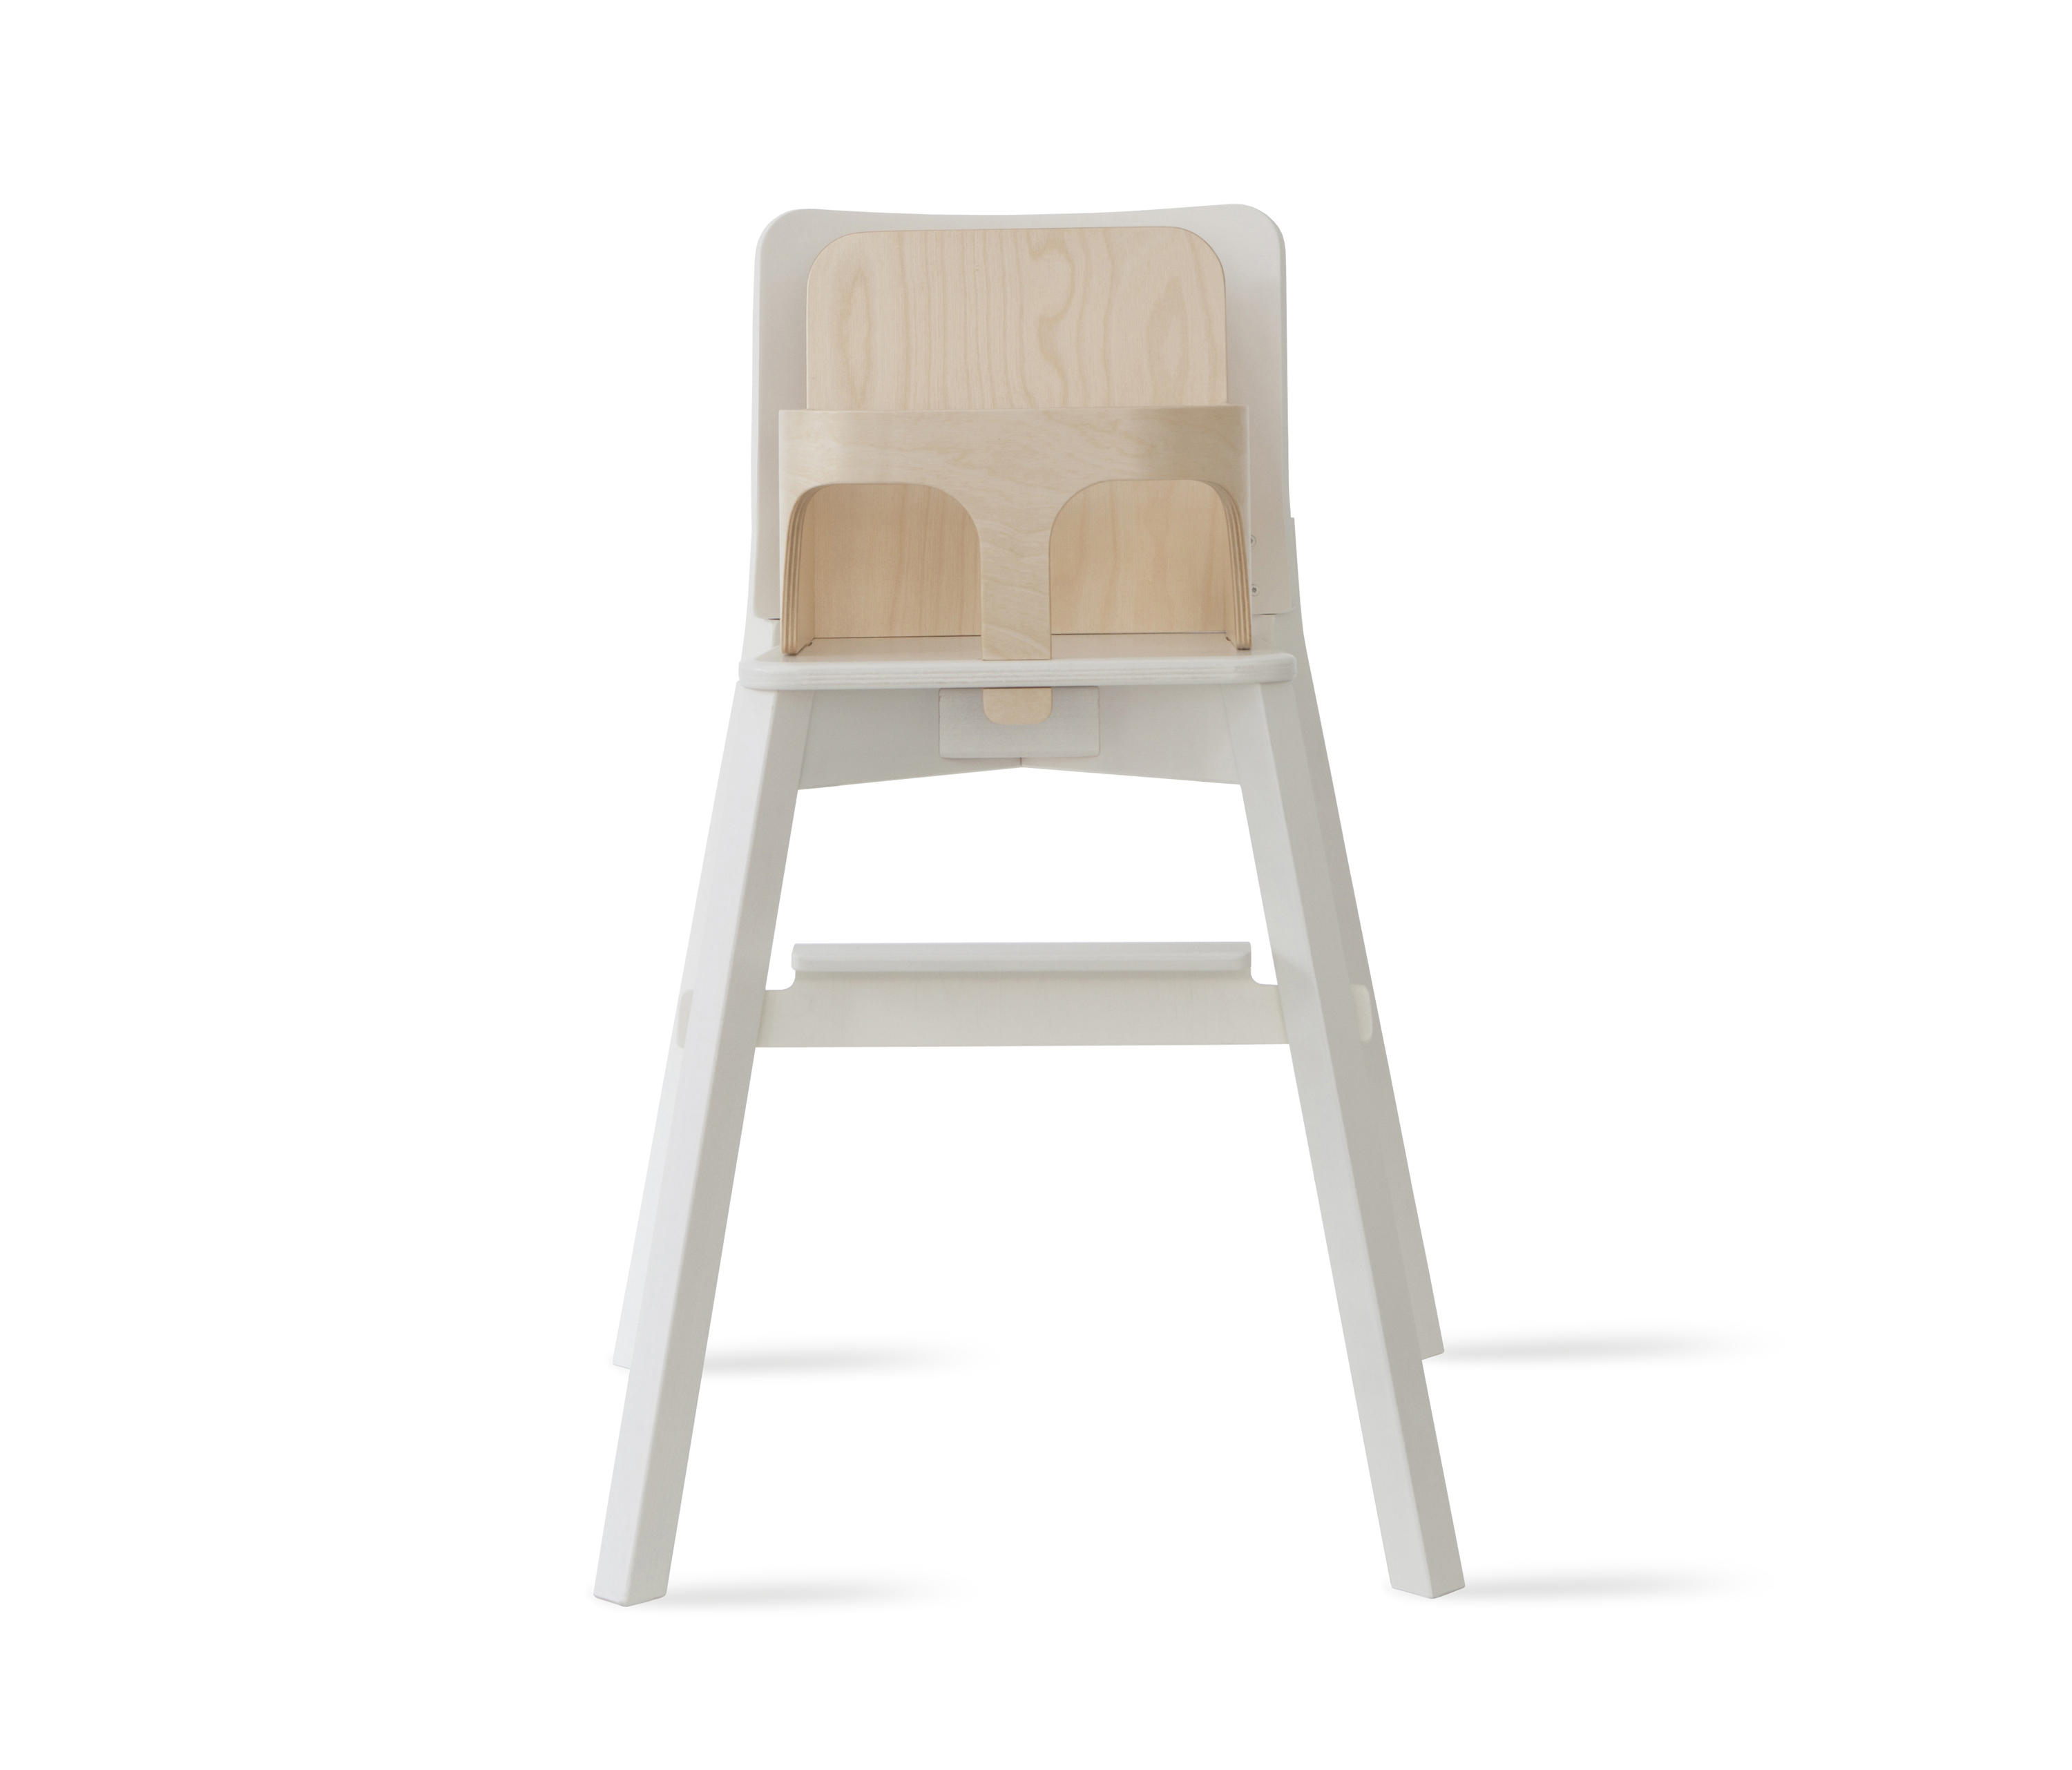 S-293 HB - High quality design S-293 HB | Architonic